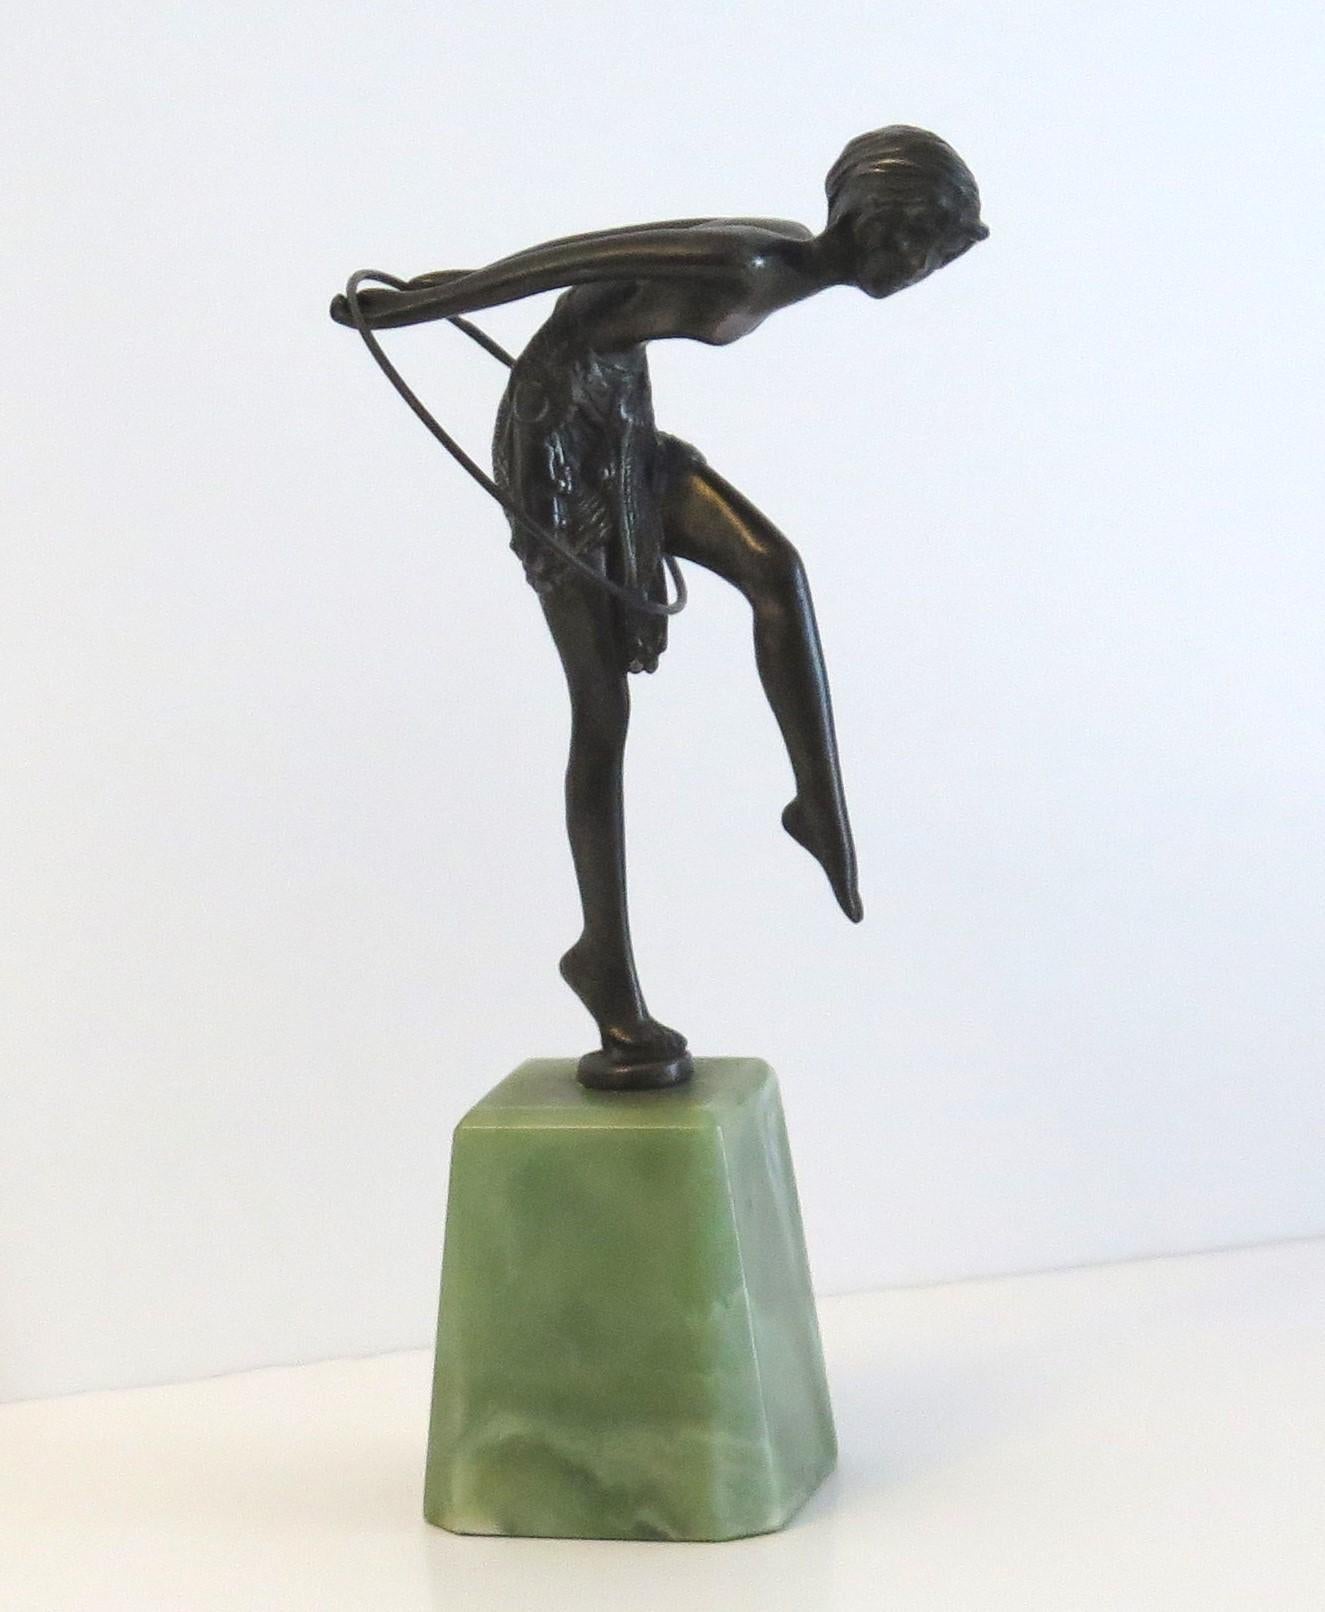 This is a solid bronze figurine of a dancing lady called Hoop Girl after D H Chiparus, on an Onyx base, dating to the Art Deco period, Circa 1925 to 1935.

The figure is beautifully sculpted in very good detail- see the skirt and feet.

The